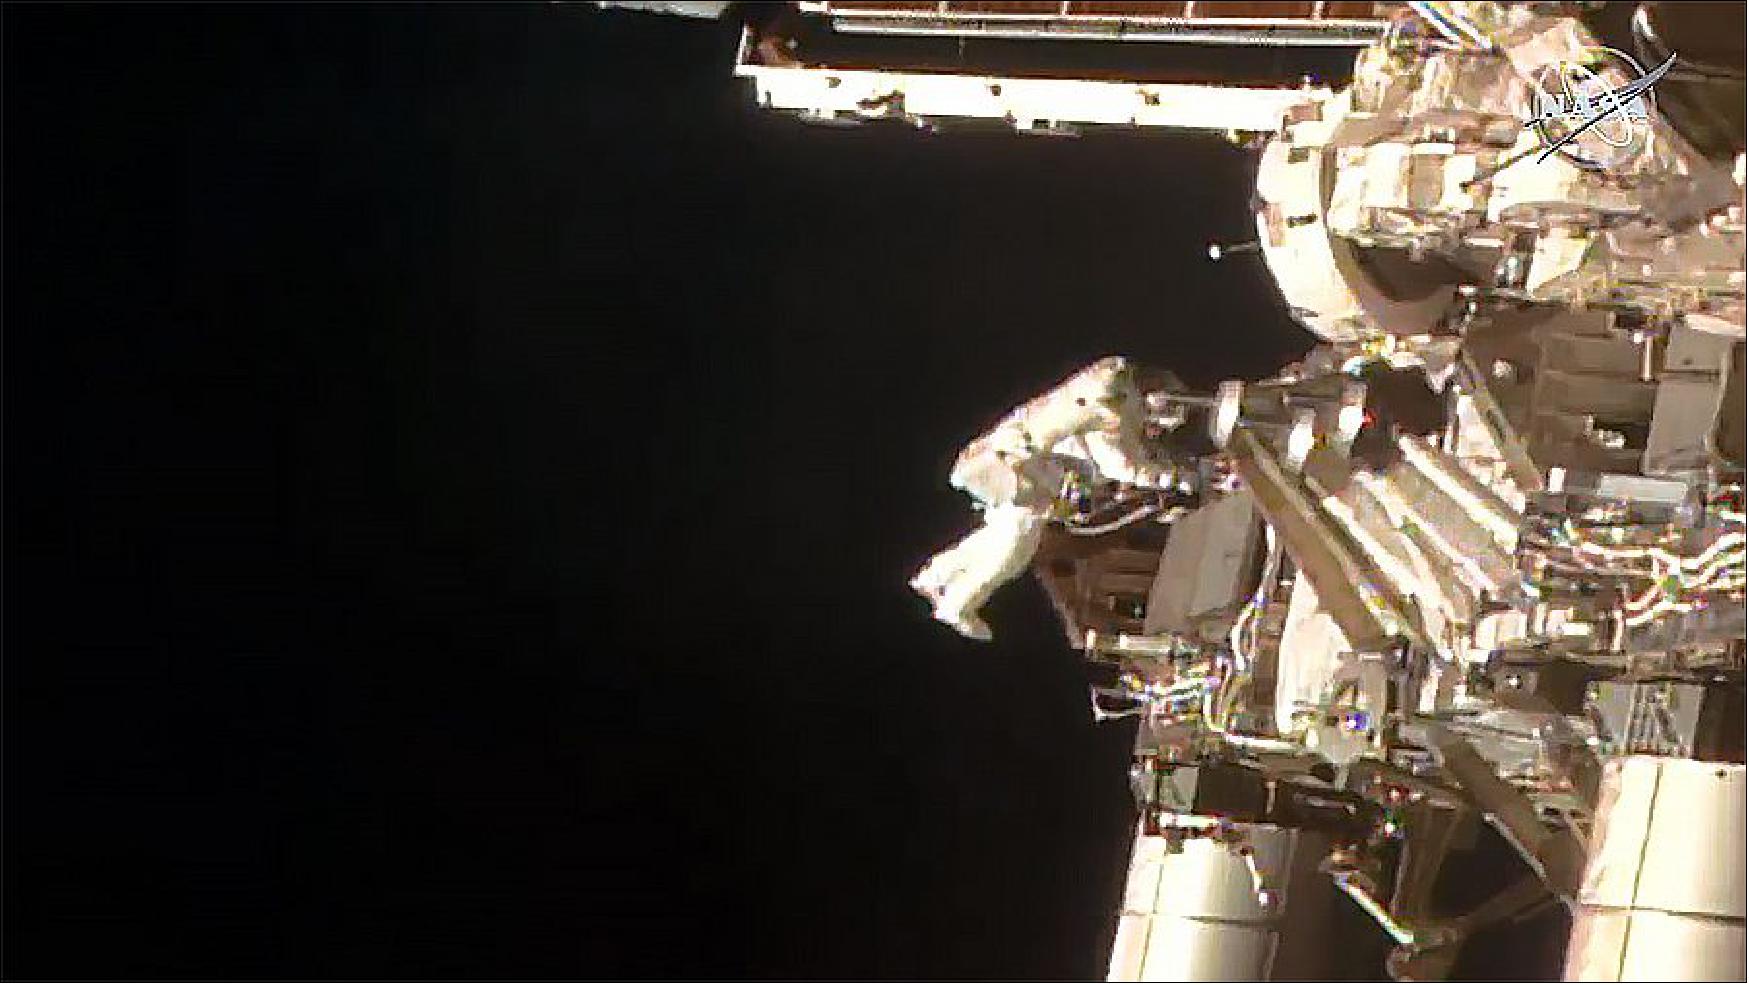 Figure 13: NASA astronaut Bob Behnken is pictured tethered to the space station during a spacewalk to swap batteries on the orbiting lab's truss structure (image credit: NASA TV)